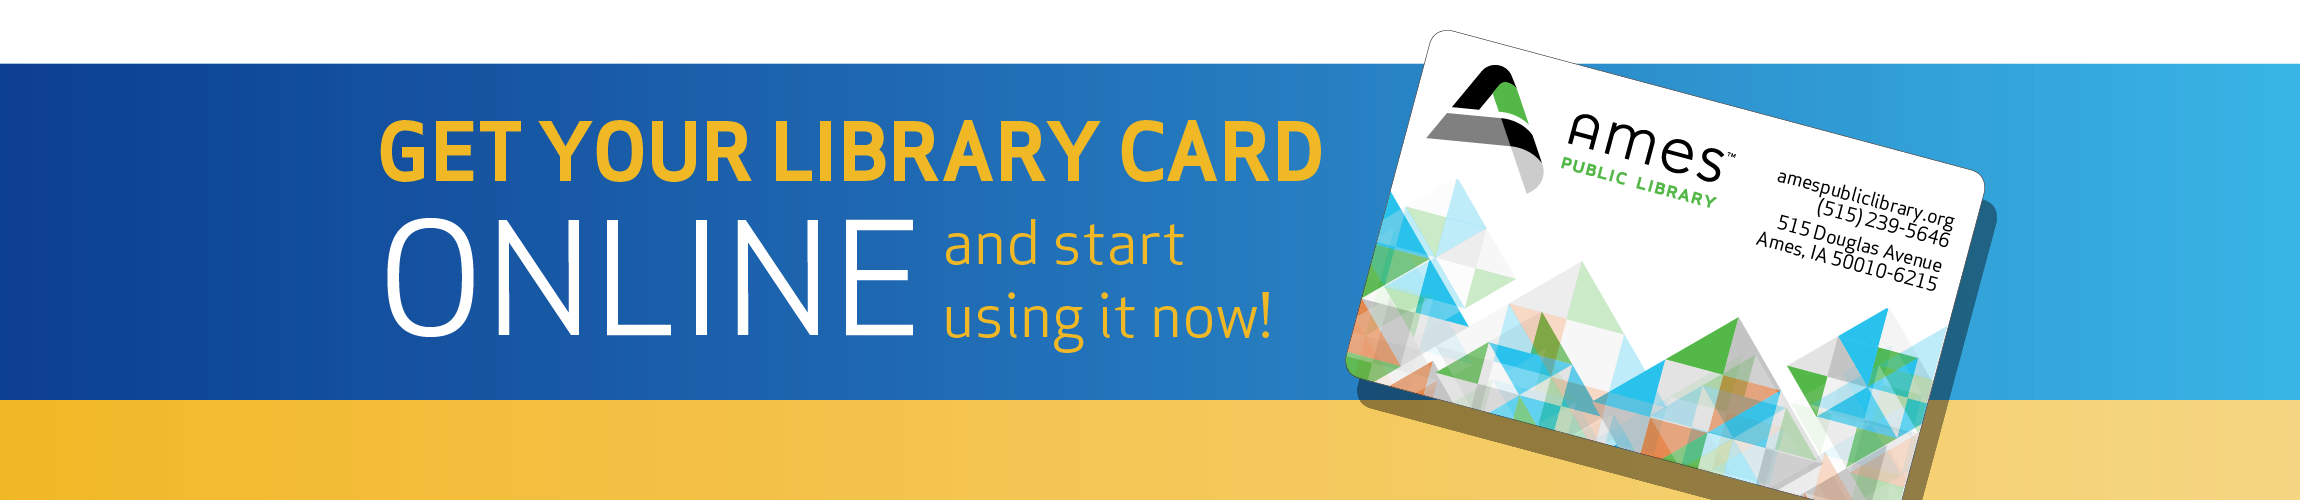 Get your library card online and start using it now!